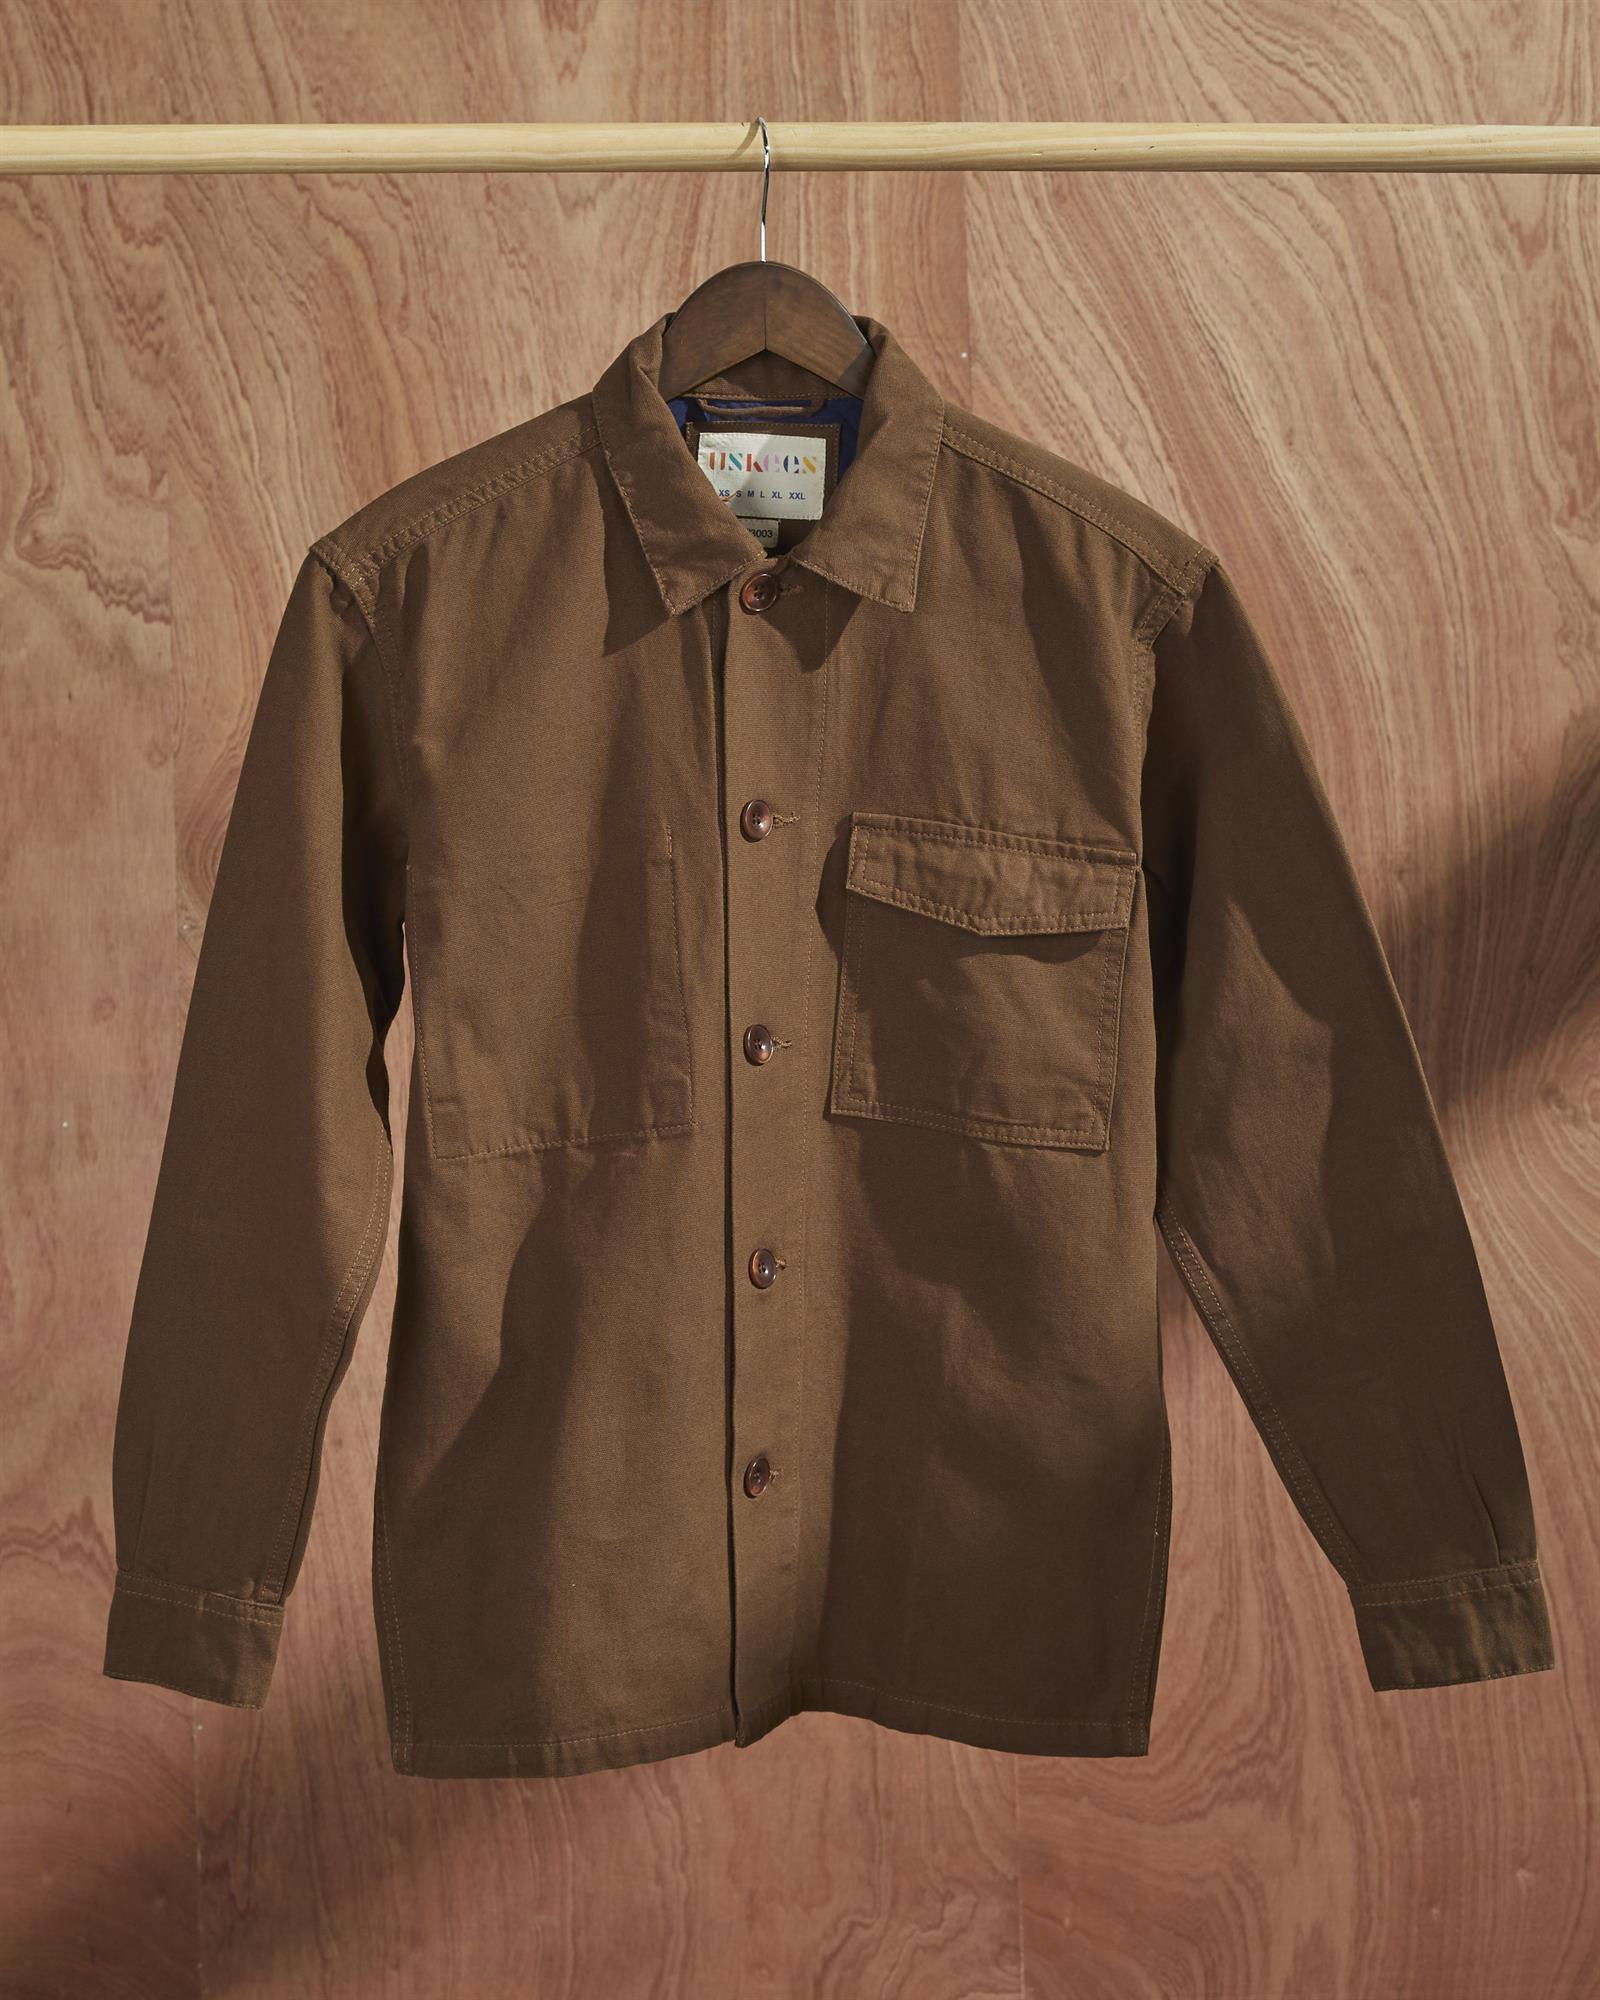 Front view of brown coloured, buttoned workshirt from Uskees presented on hanger with wooden backdrop.